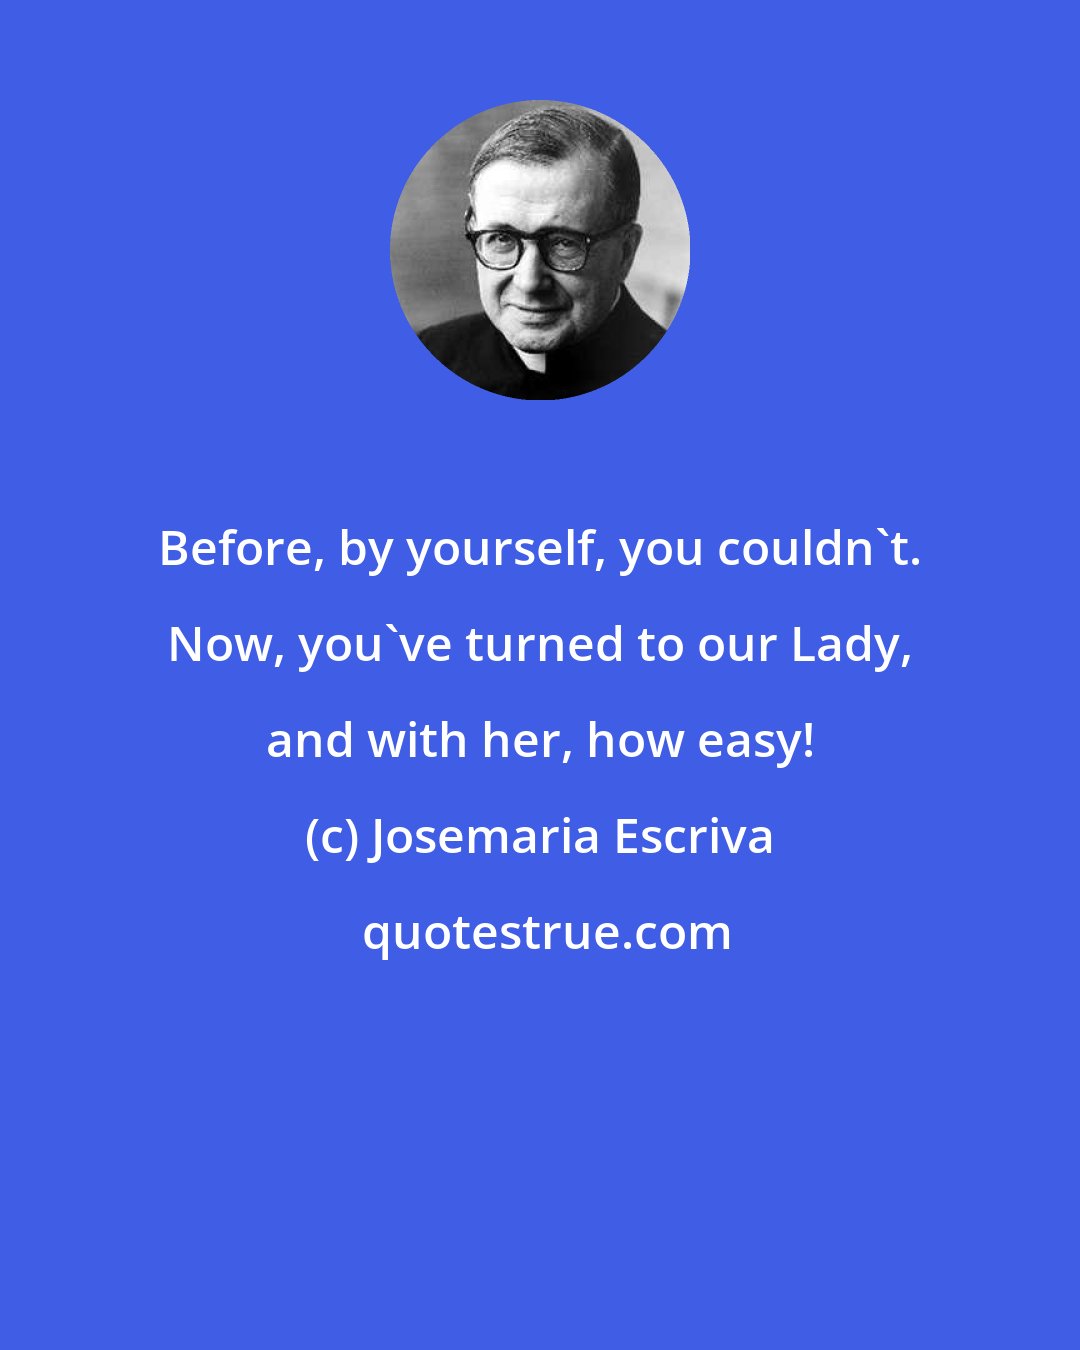 Josemaria Escriva: Before, by yourself, you couldn't. Now, you've turned to our Lady, and with her, how easy!